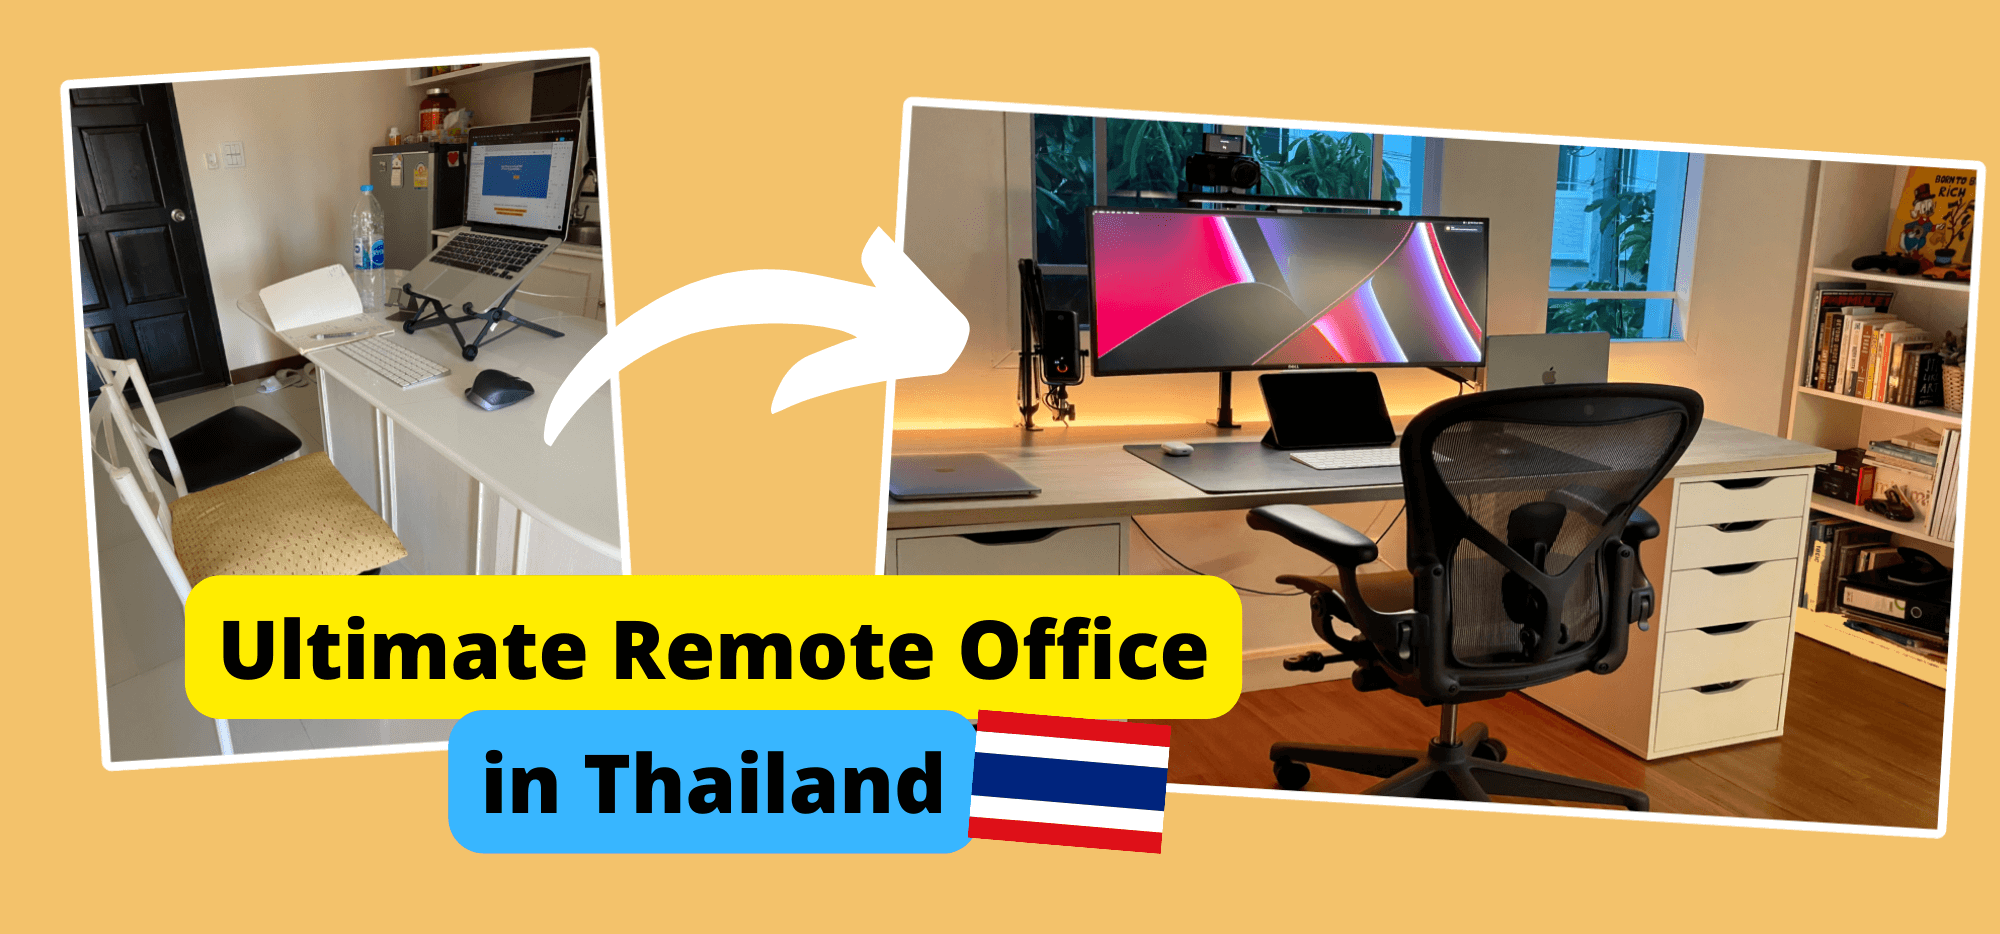 Building the Ultimate Remote Office in Thailand